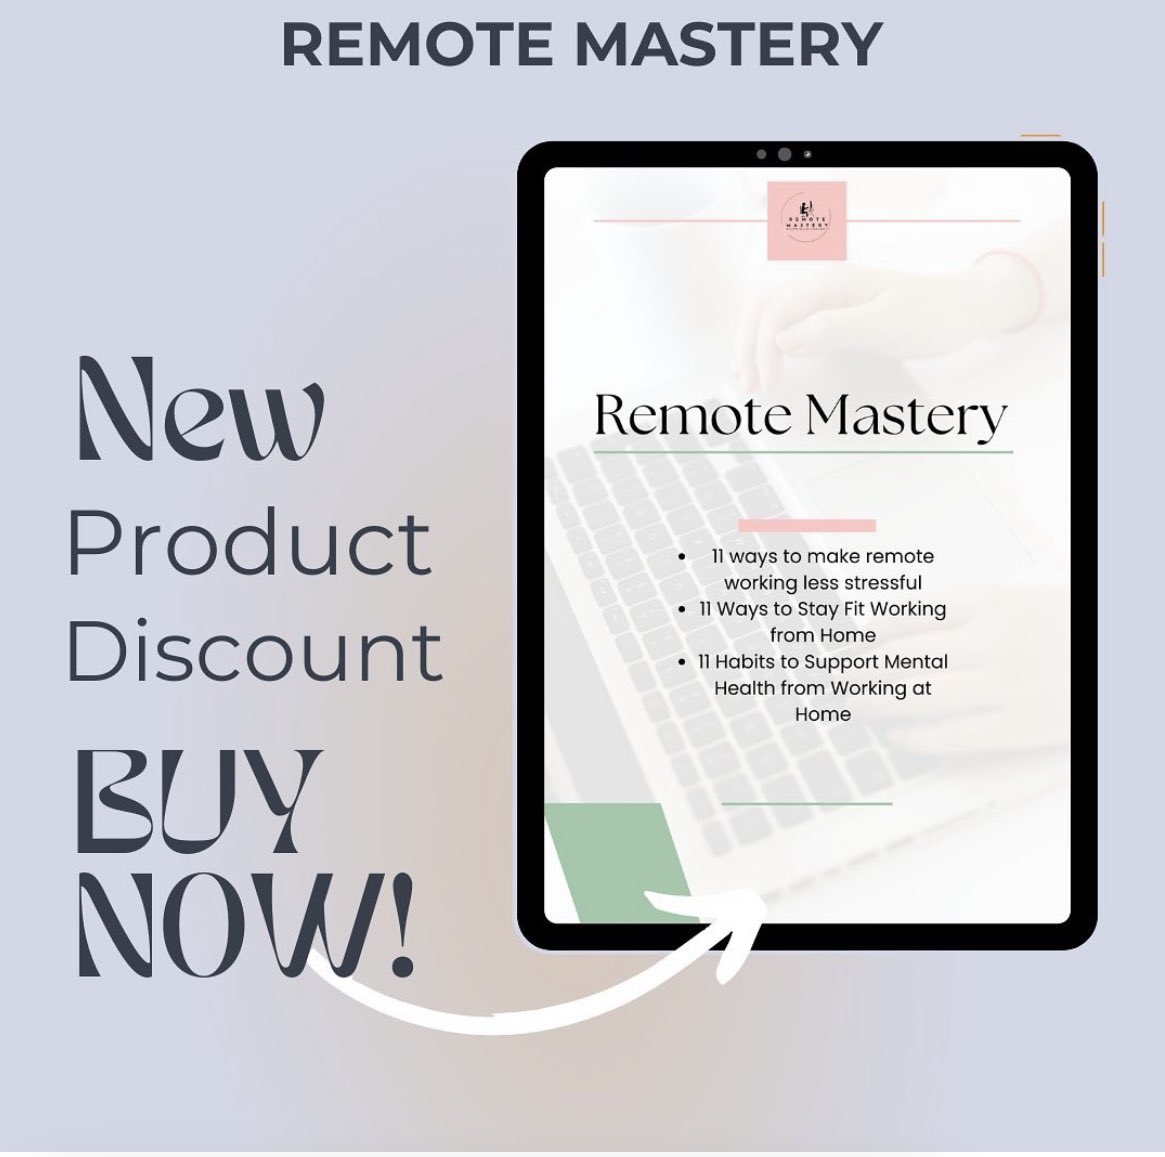 Reduce remote working stress 🧠 find our digital tool kit to guide you through every area holding you back from productivity 🚀 
#remotemastery #remotework #cheatsheet #reducestress #digitaltool #toolkit #productivityguide